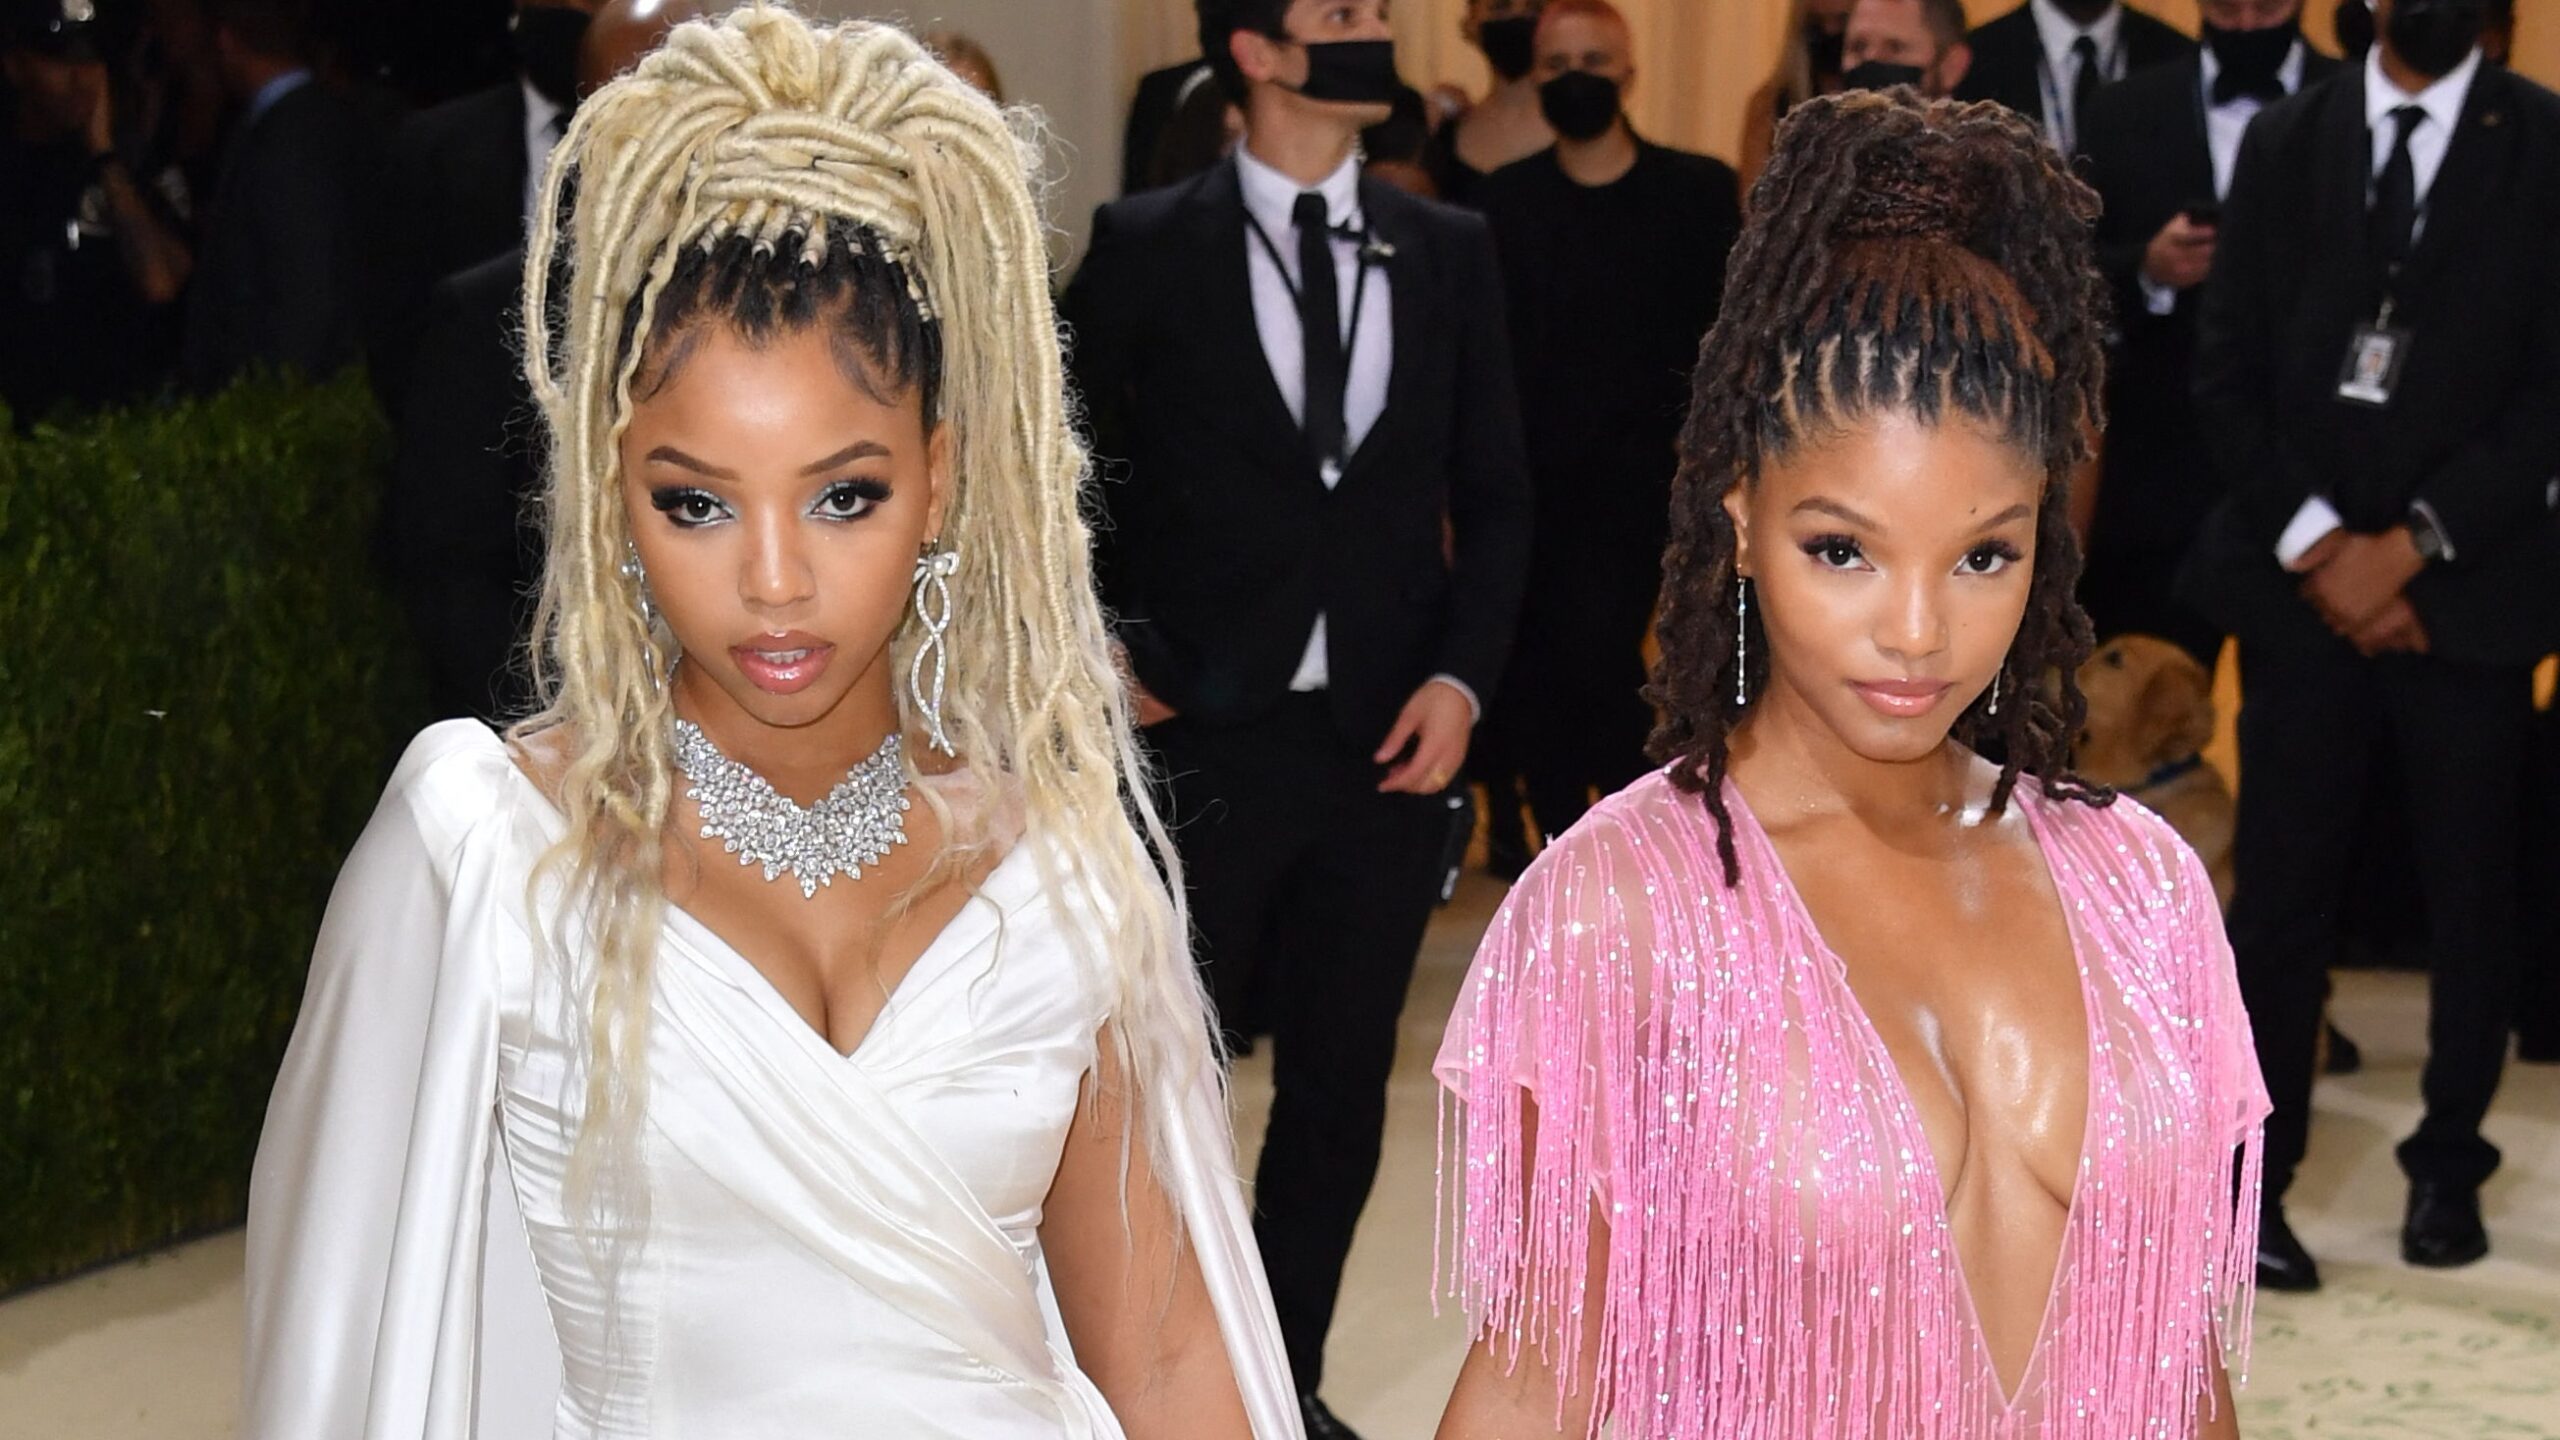 Chloe x Halle Brought Sisterly Love To The MET Gala Red Carpet